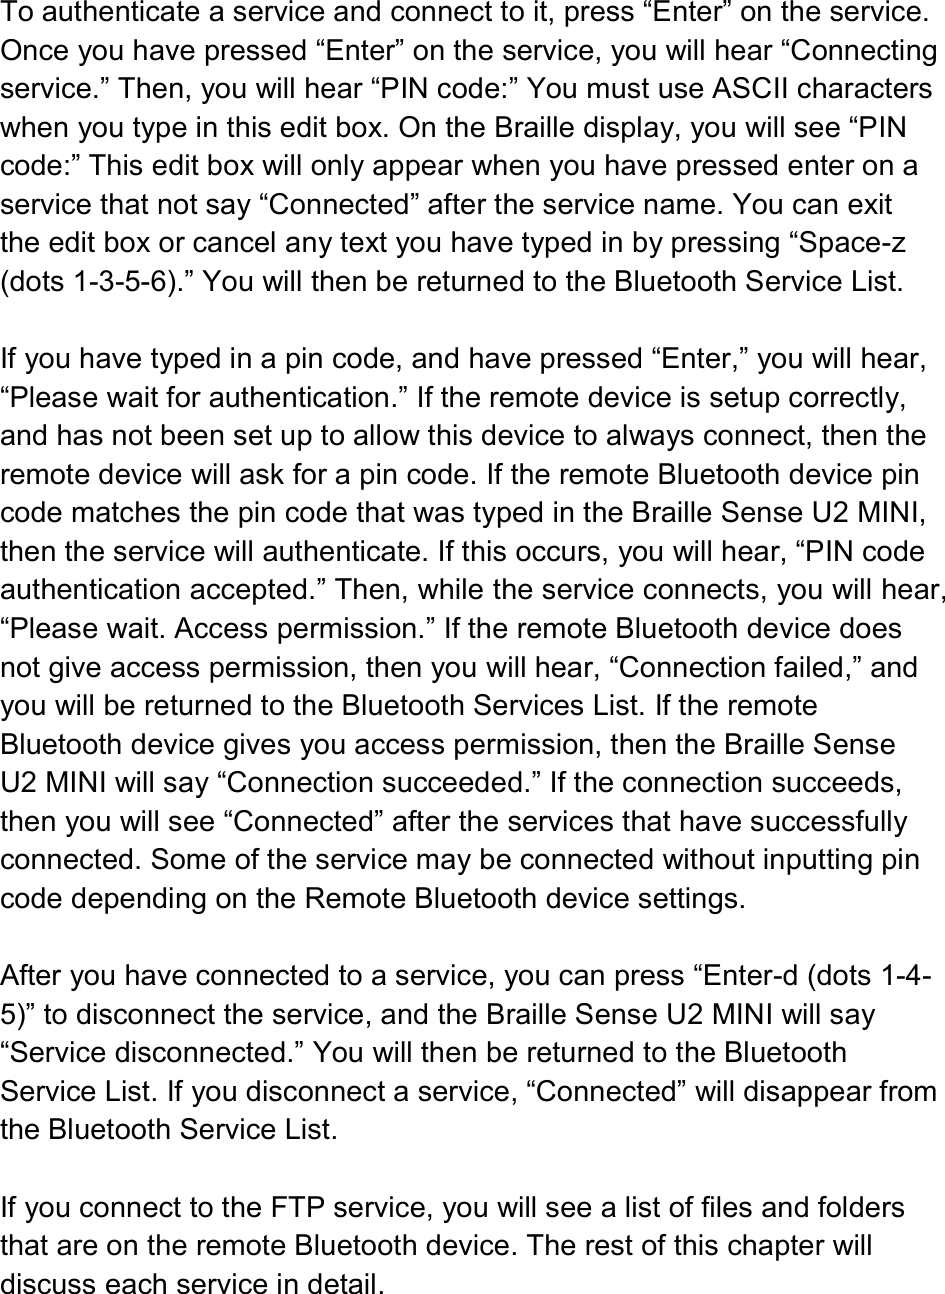  To authenticate a service and connect to it, press “Enter” on the service. Once you have pressed “Enter” on the service, you will hear “Connecting service.” Then, you will hear “PIN code:” You must use ASCII characters when you type in this edit box. On the Braille display, you will see “PIN code:” This edit box will only appear when you have pressed enter on a service that not say “Connected” after the service name. You can exit the edit box or cancel any text you have typed in by pressing “Space-z (dots 1-3-5-6).” You will then be returned to the Bluetooth Service List.  If you have typed in a pin code, and have pressed “Enter,” you will hear, “Please wait for authentication.” If the remote device is setup correctly, and has not been set up to allow this device to always connect, then the remote device will ask for a pin code. If the remote Bluetooth device pin code matches the pin code that was typed in the Braille Sense U2 MINI, then the service will authenticate. If this occurs, you will hear, “PIN code authentication accepted.” Then, while the service connects, you will hear, “Please wait. Access permission.” If the remote Bluetooth device does not give access permission, then you will hear, “Connection failed,” and you will be returned to the Bluetooth Services List. If the remote Bluetooth device gives you access permission, then the Braille Sense U2 MINI will say “Connection succeeded.” If the connection succeeds, then you will see “Connected” after the services that have successfully connected. Some of the service may be connected without inputting pin code depending on the Remote Bluetooth device settings.  After you have connected to a service, you can press “Enter-d (dots 1-4-5)” to disconnect the service, and the Braille Sense U2 MINI will say “Service disconnected.” You will then be returned to the Bluetooth Service List. If you disconnect a service, “Connected” will disappear from the Bluetooth Service List.  If you connect to the FTP service, you will see a list of files and folders that are on the remote Bluetooth device. The rest of this chapter will discuss each service in detail.  